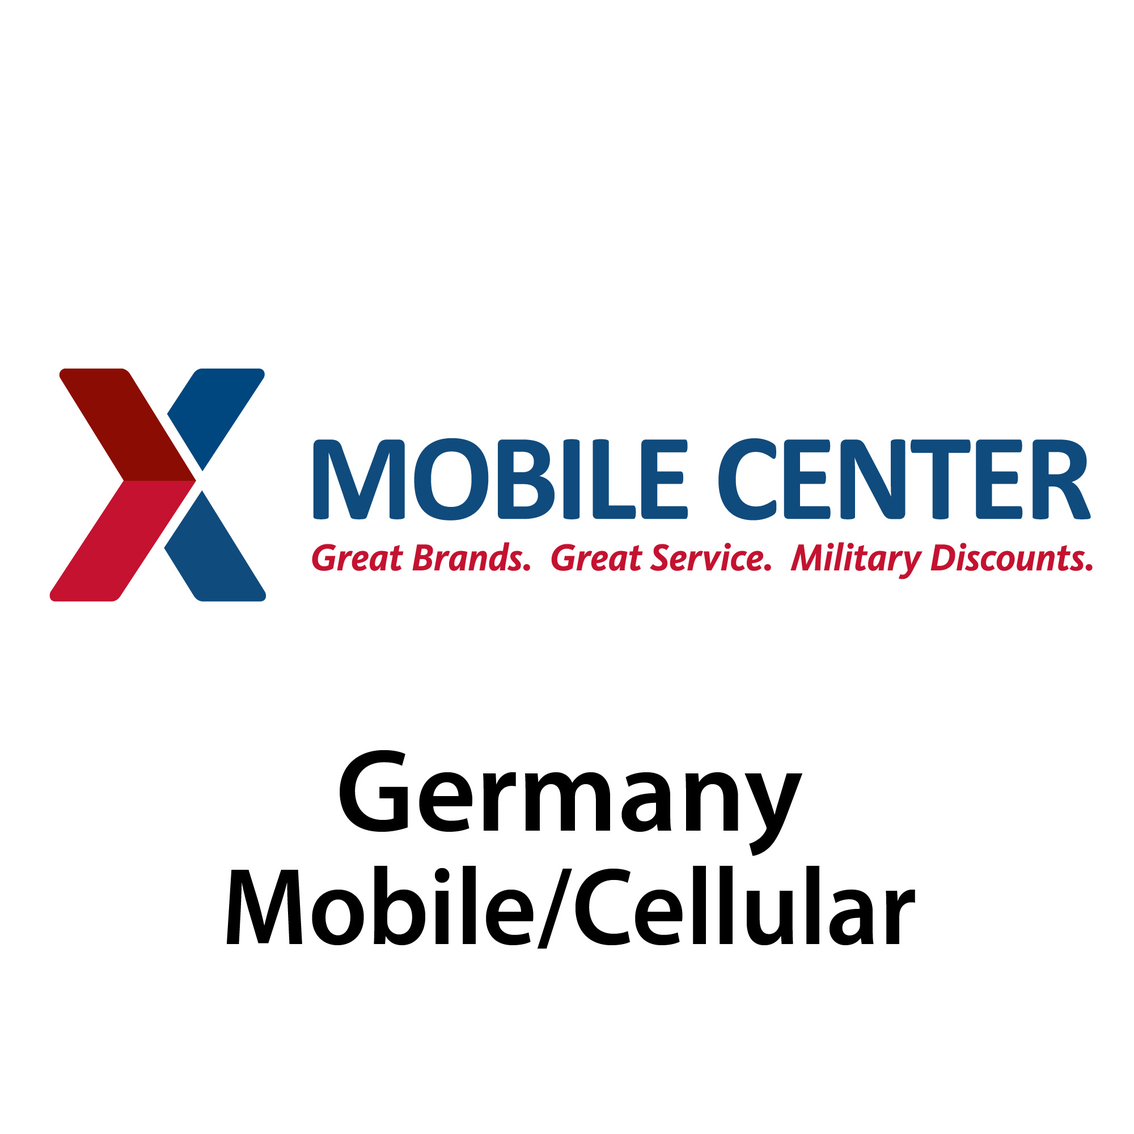 Exchange Mobile Center Germany Marketplace Electronics Shop The Exchange pic